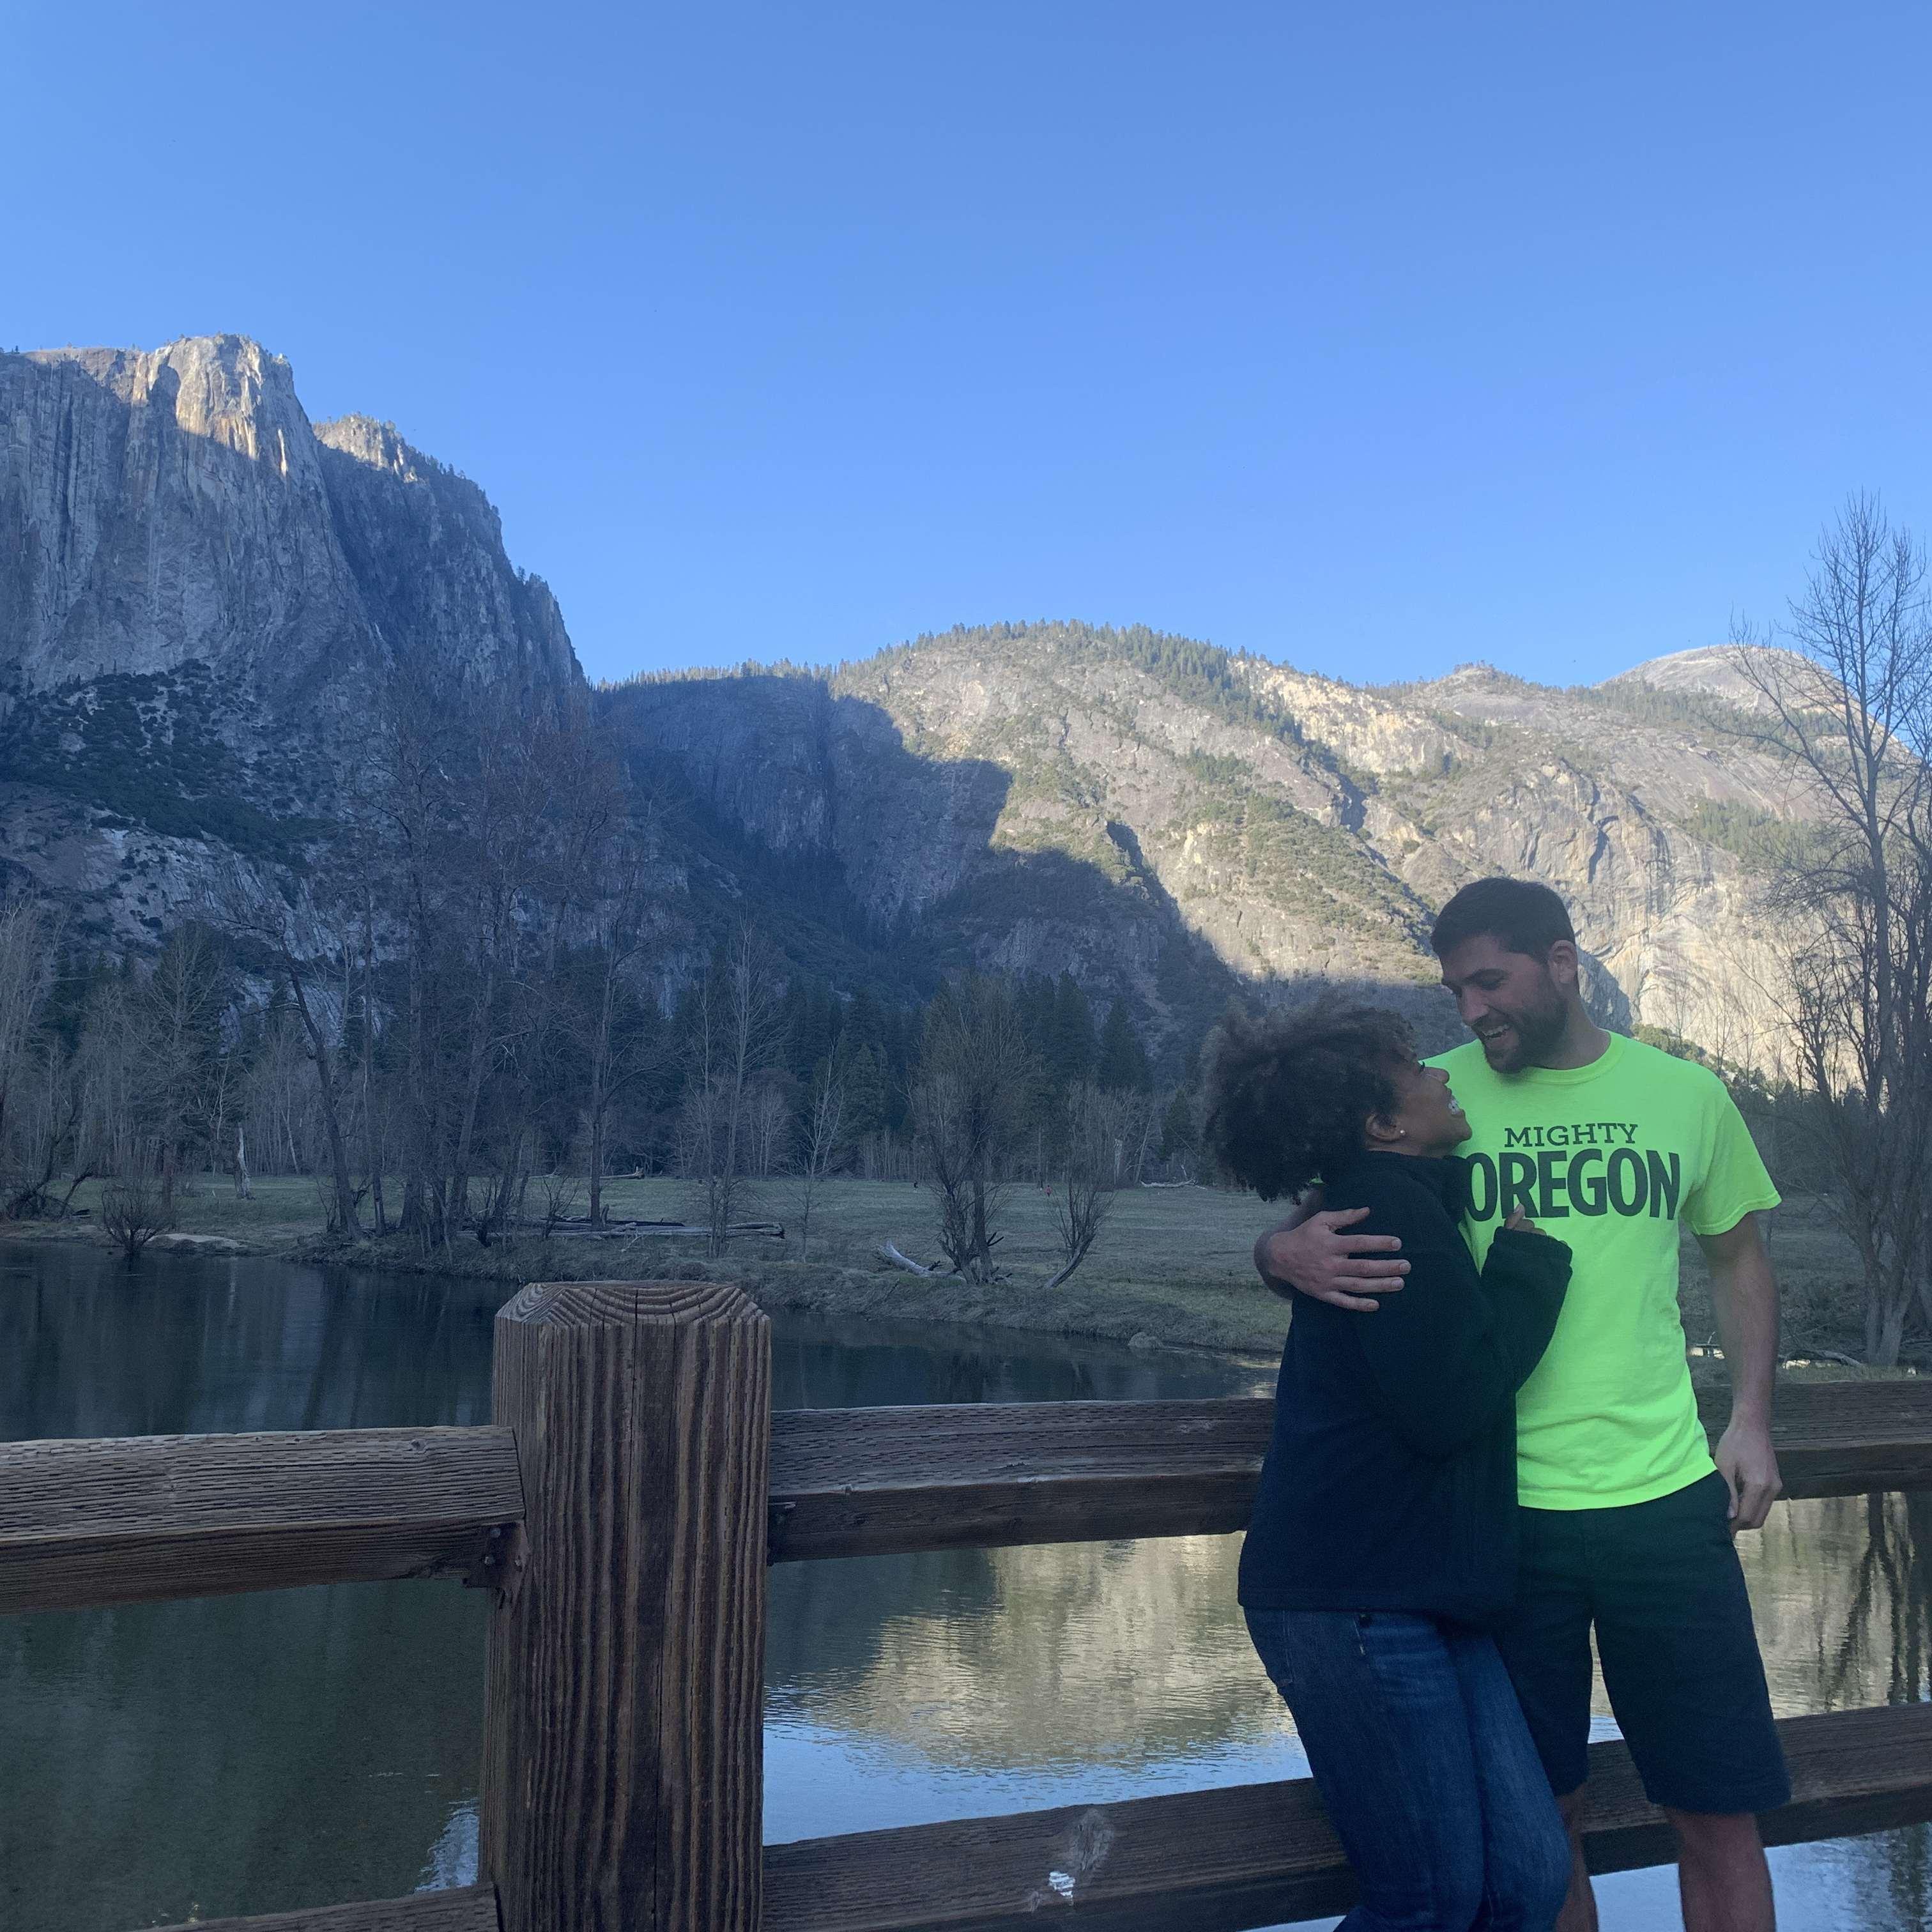 He came to Fresno and we drove to Yosemite National Park. I want to say this was the day I knew.